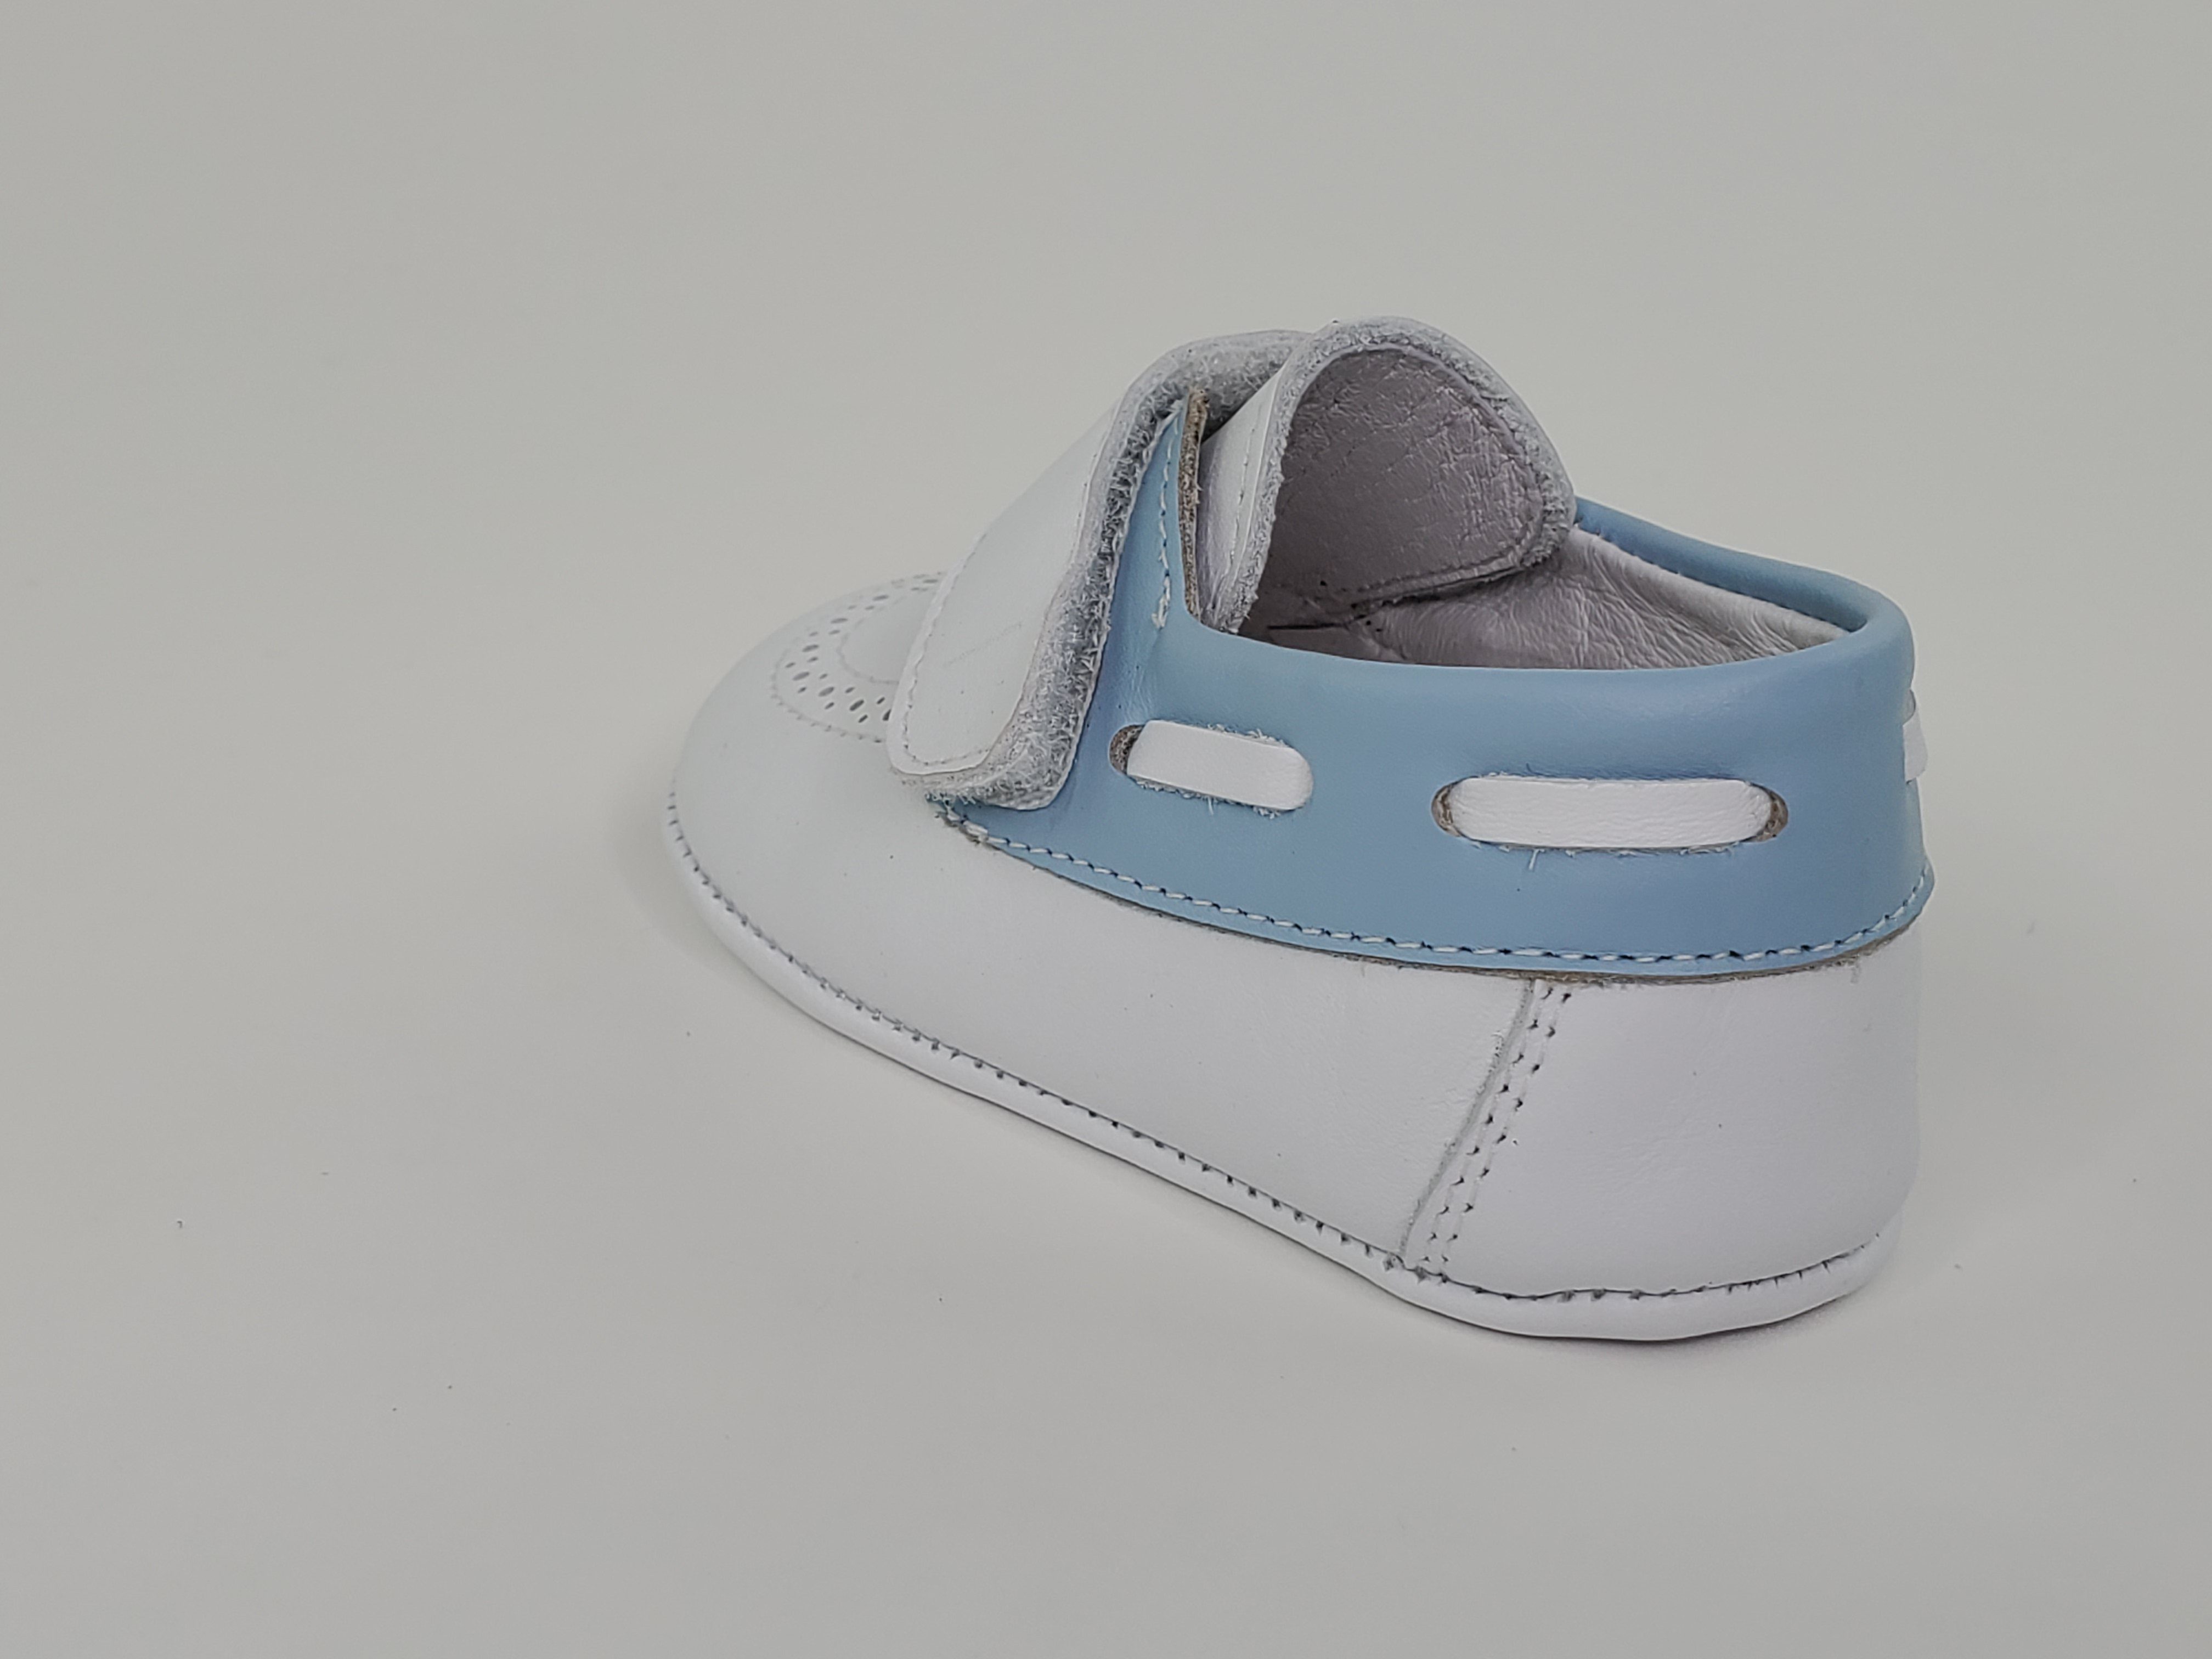 Napa white and Sky Blue Pre-walker Shoes-Toddler Boy Shoes Boys Shoes Alfa Baby Boutique 